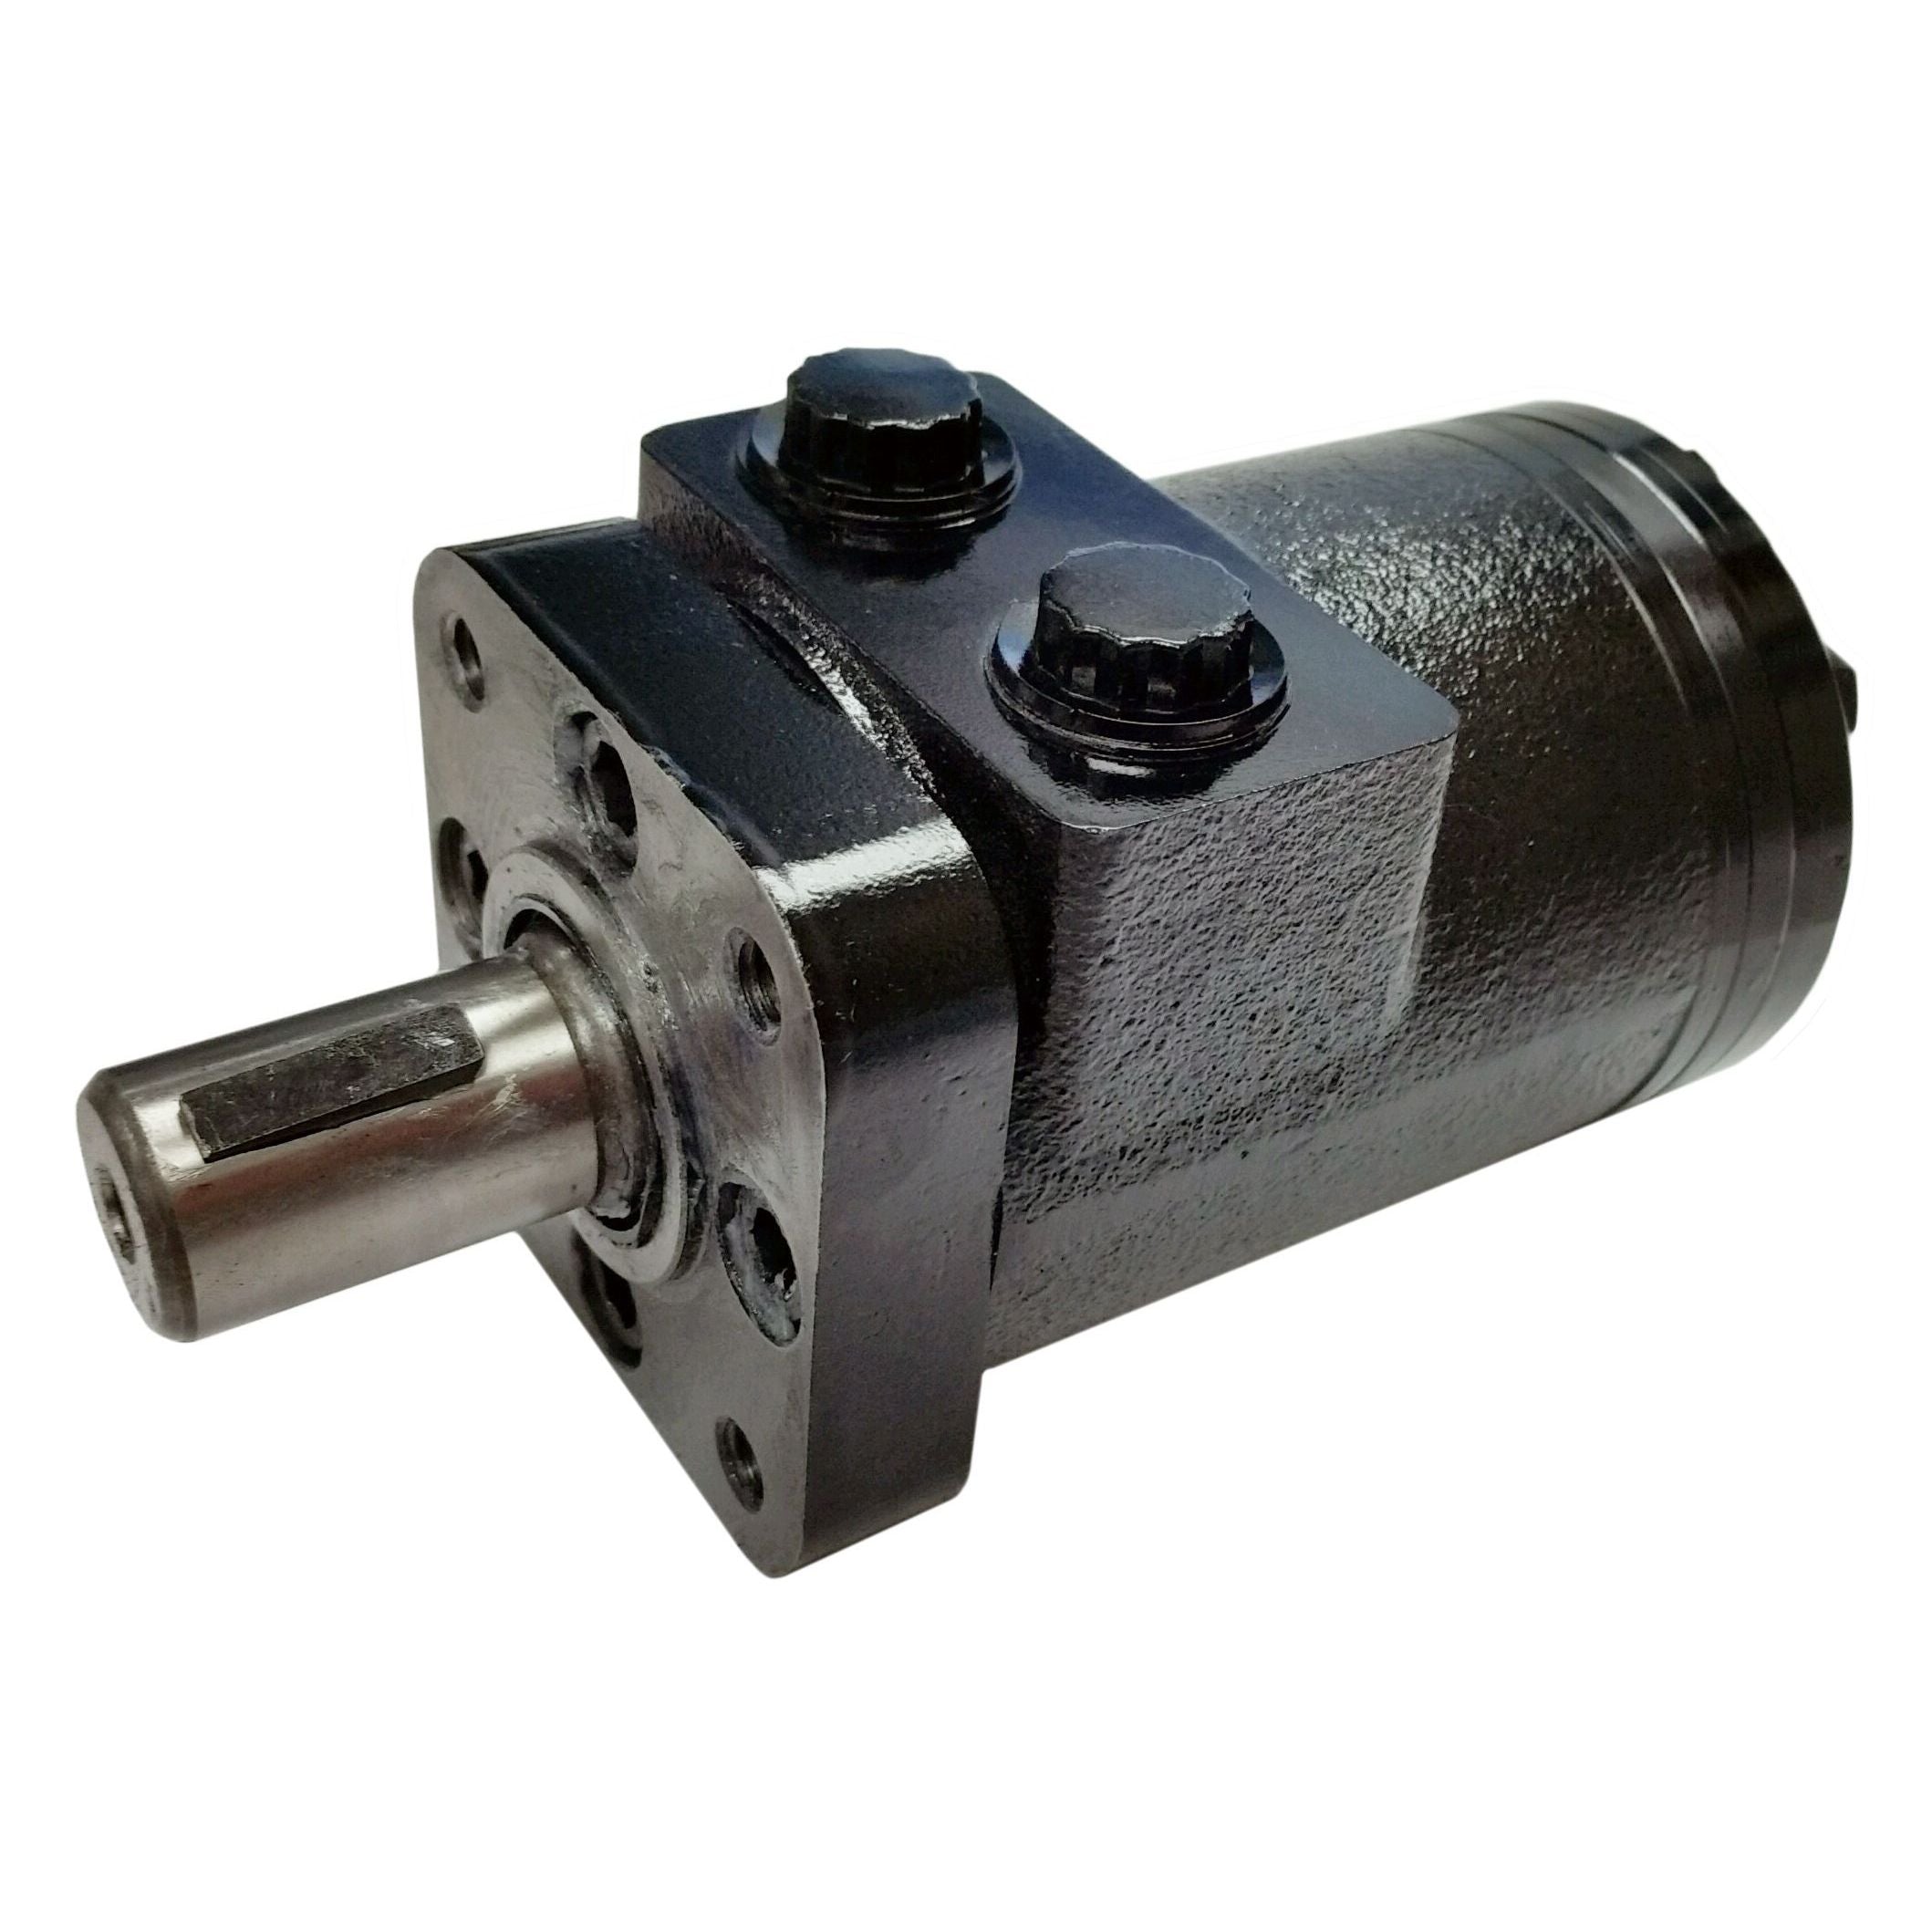 BMPH-100-H4-K-F : Dynamic LSHT Motor, 96.2cc, 615RPM, 1611in-lb, 2031psi Differential, 15.85GPM, SAE A 4-Bolt Mount, 1" Bore x 1/4" Key Shaft, Side Ported, Manifold